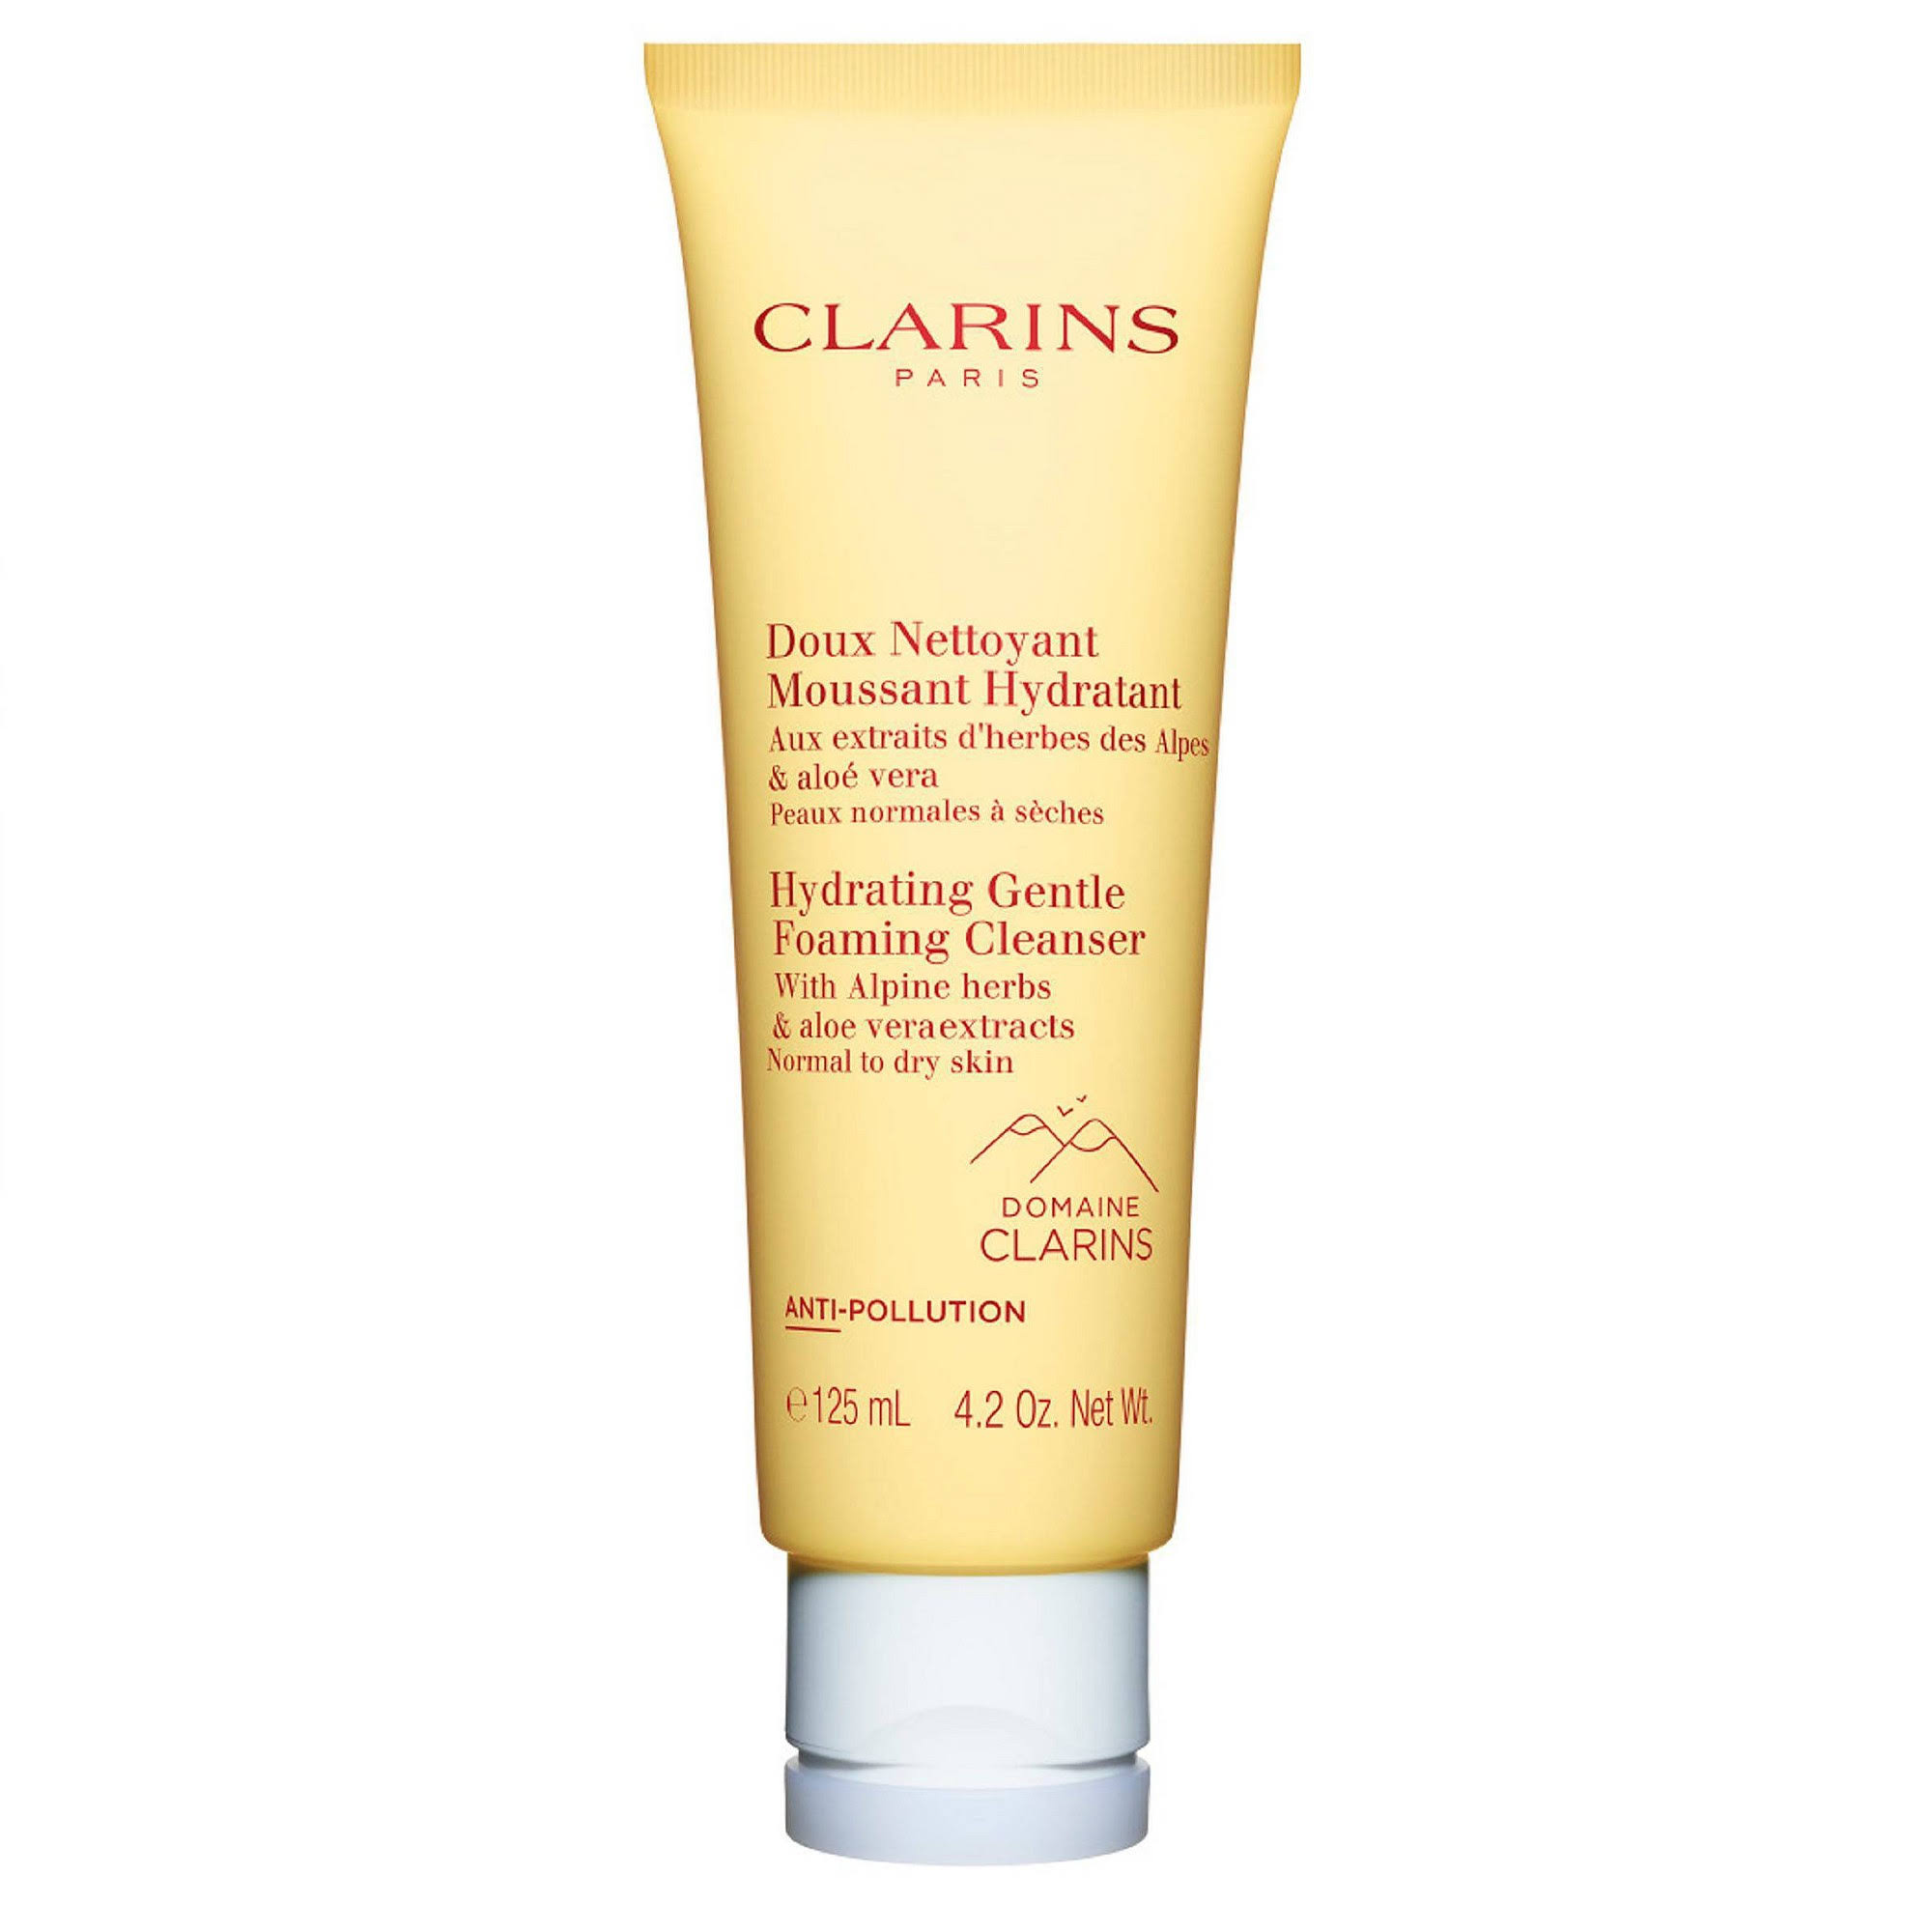 Clarins Hydrating Gentle Foaming Cleanser - 4.2 oz